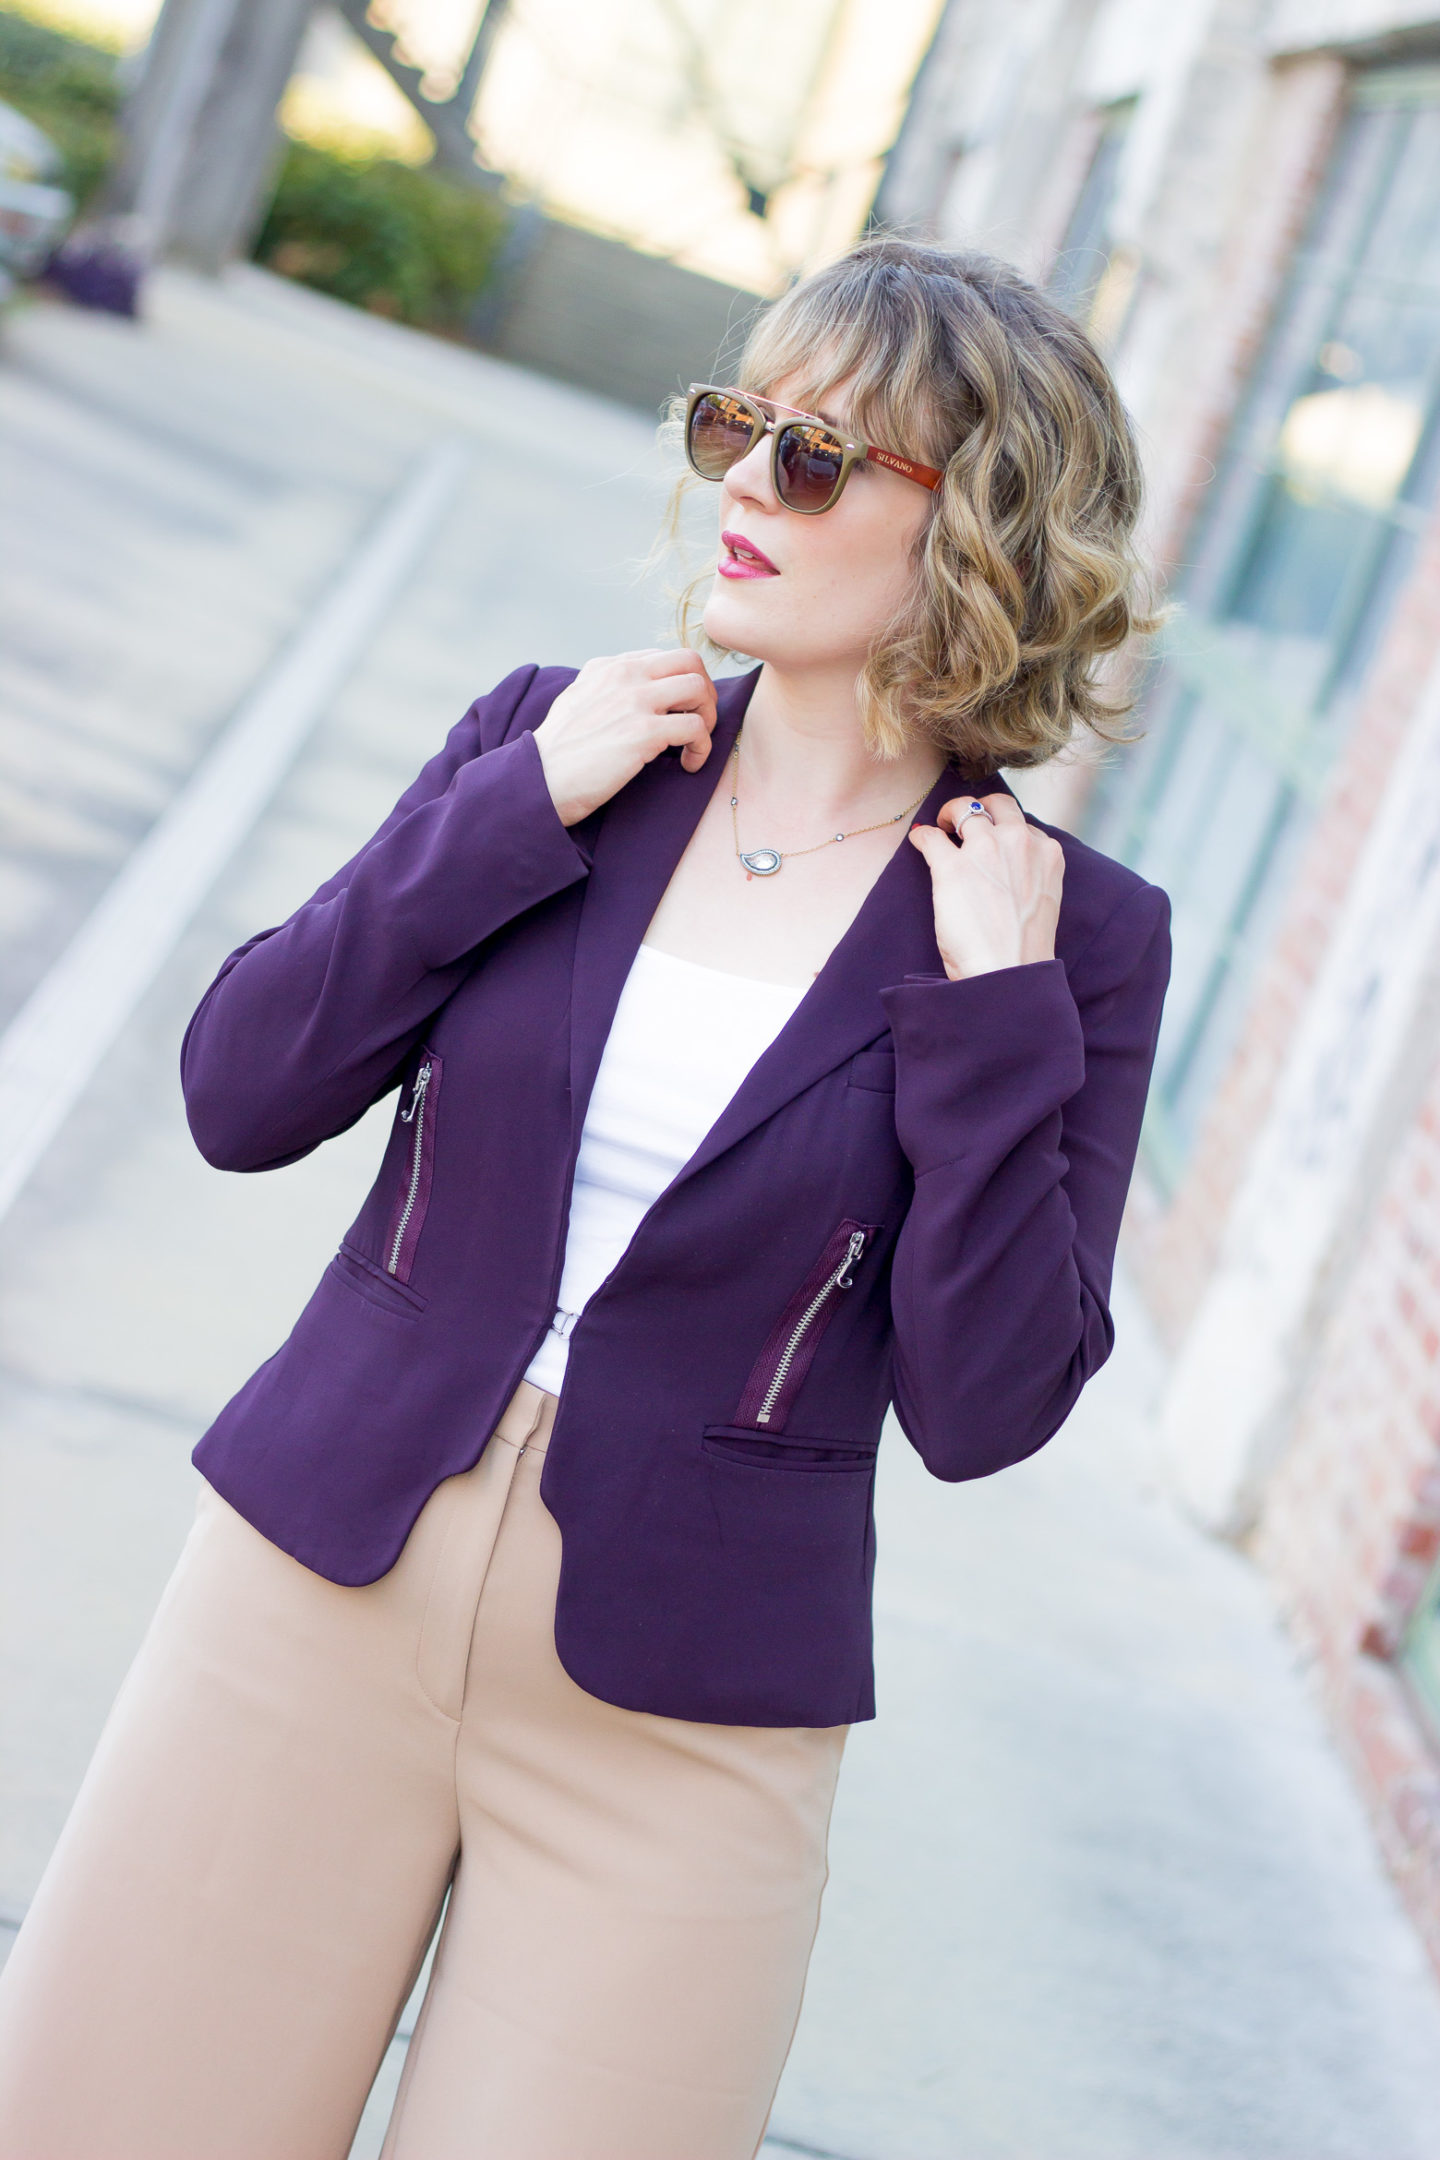 HOW TO BUILD YOUR CORPORATE WARDROBE – A GUEST POST!